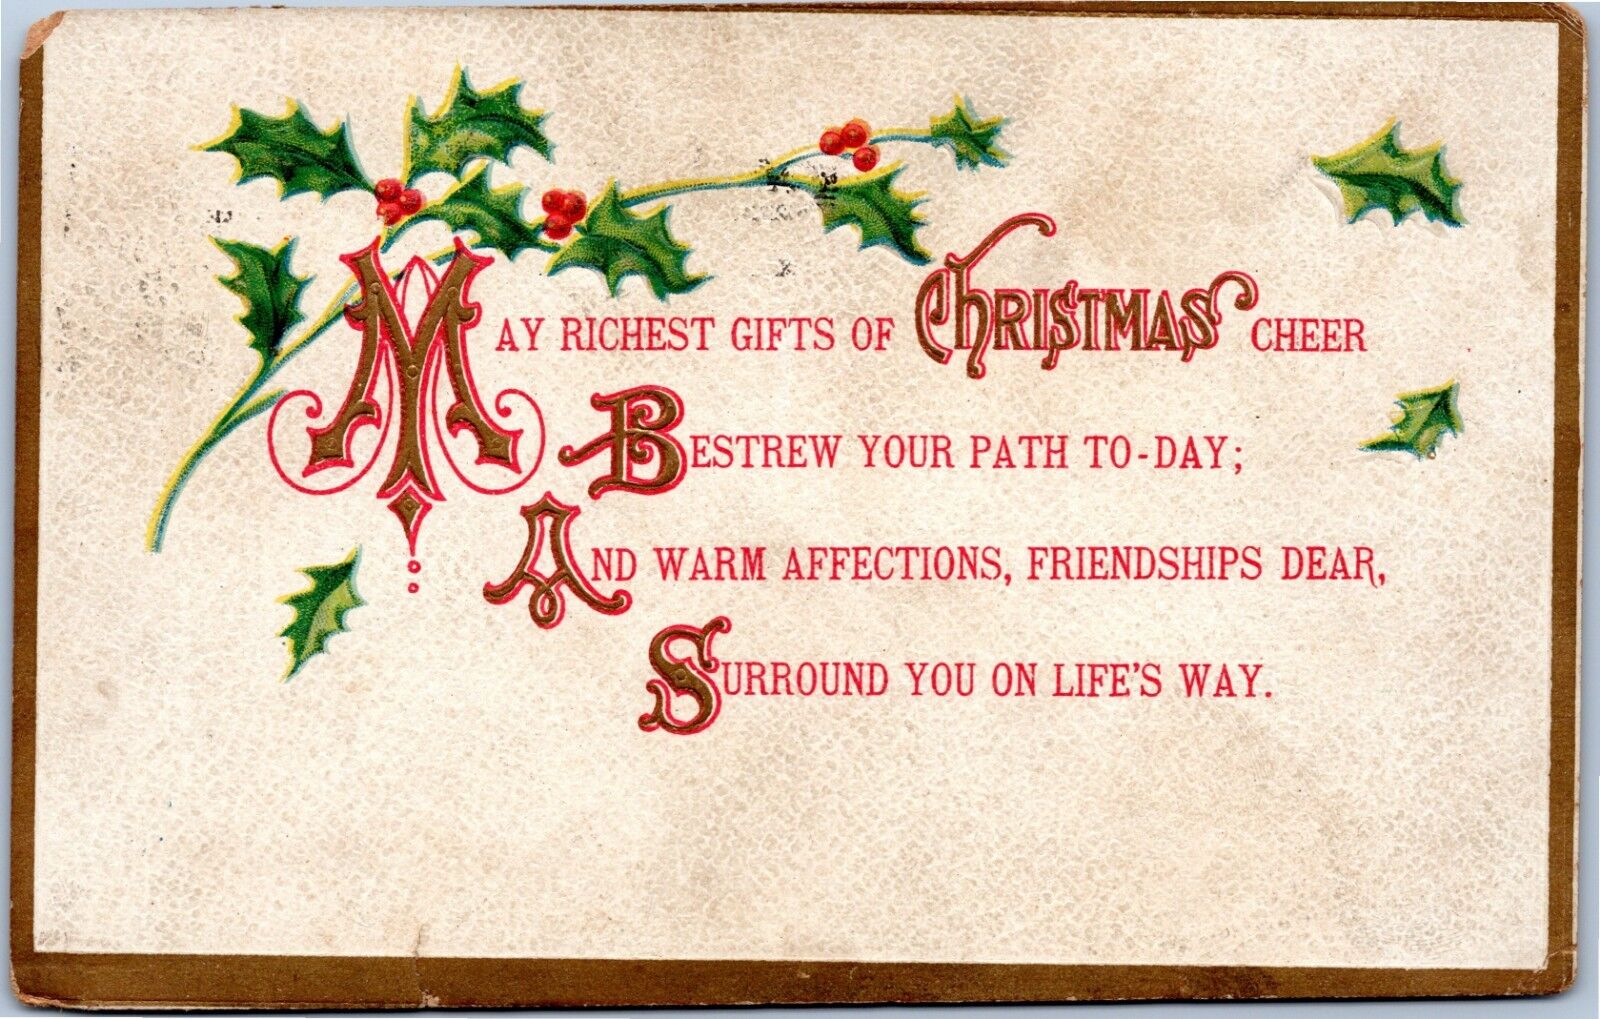 postcard -May richest gifts of Christmas Cheer - posted 1916